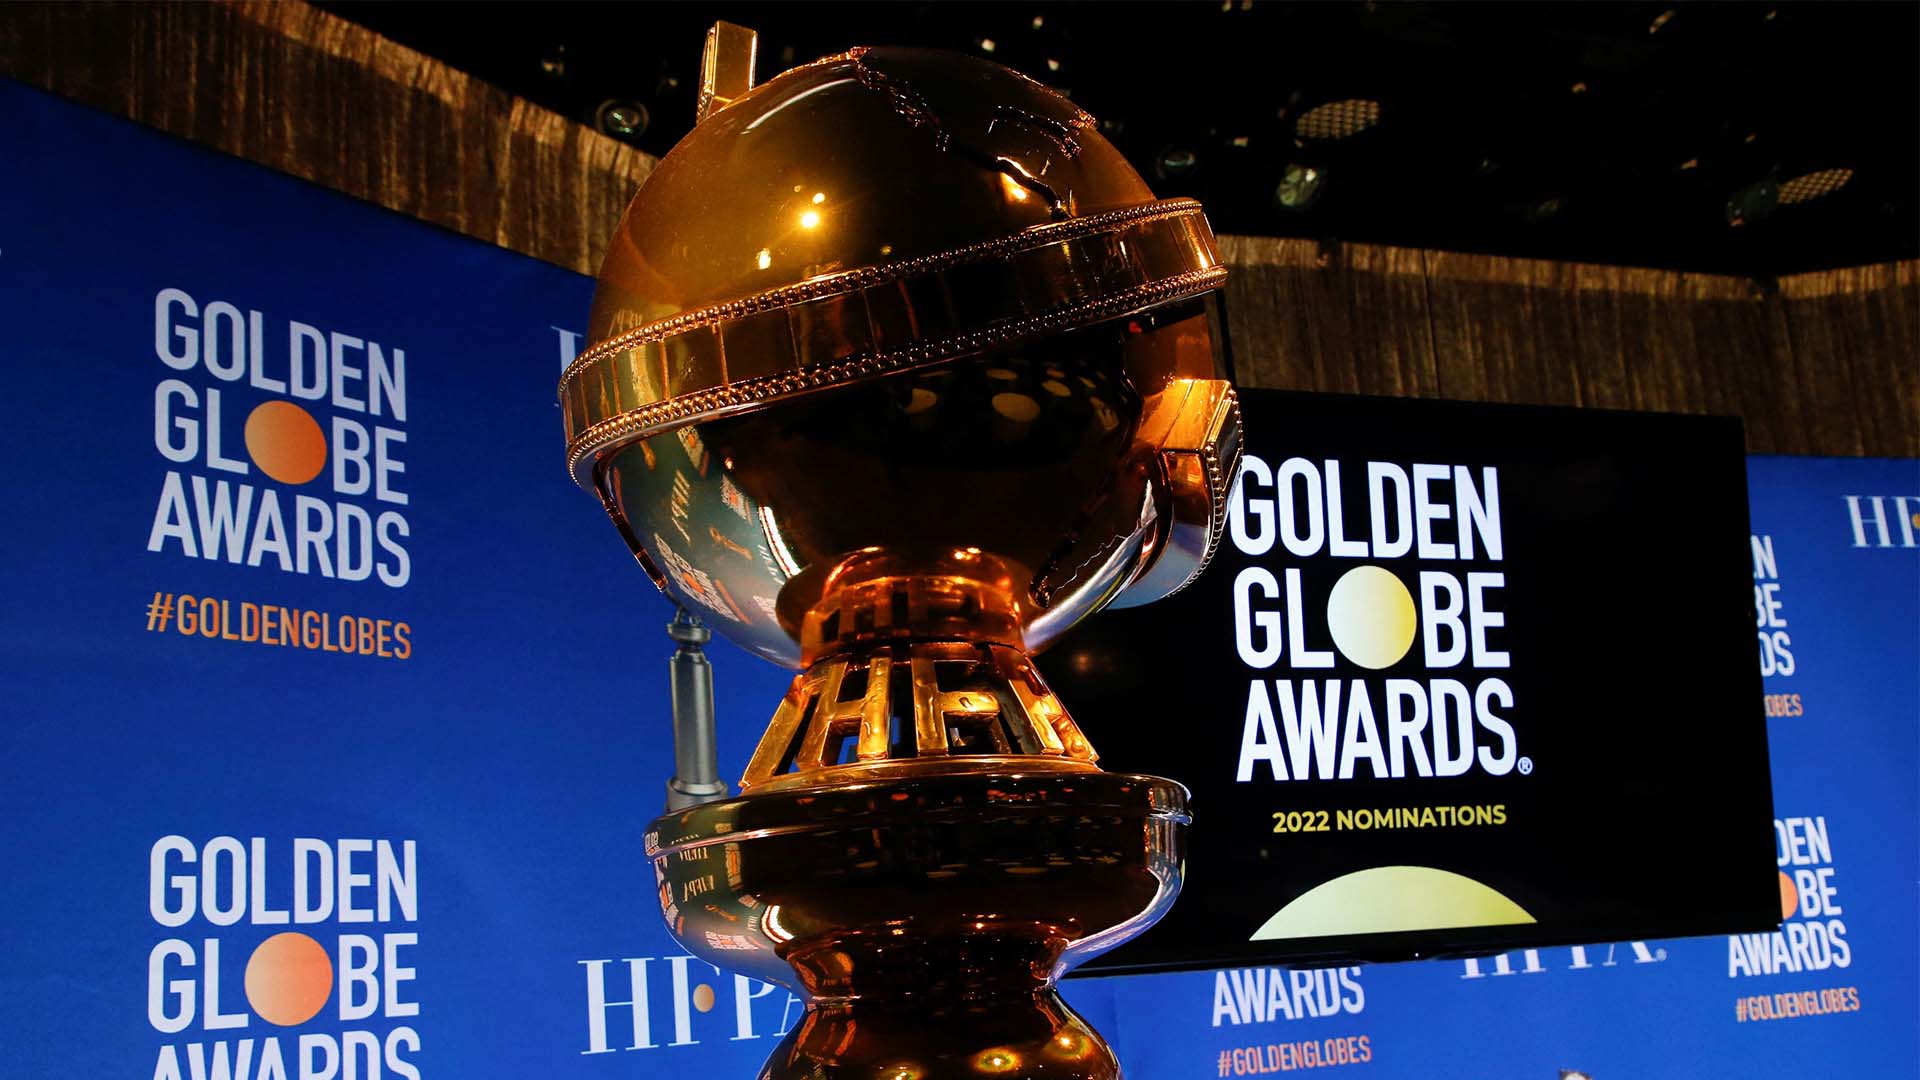 Golden Globes Winners 2023 announced, check the complete list_50.1